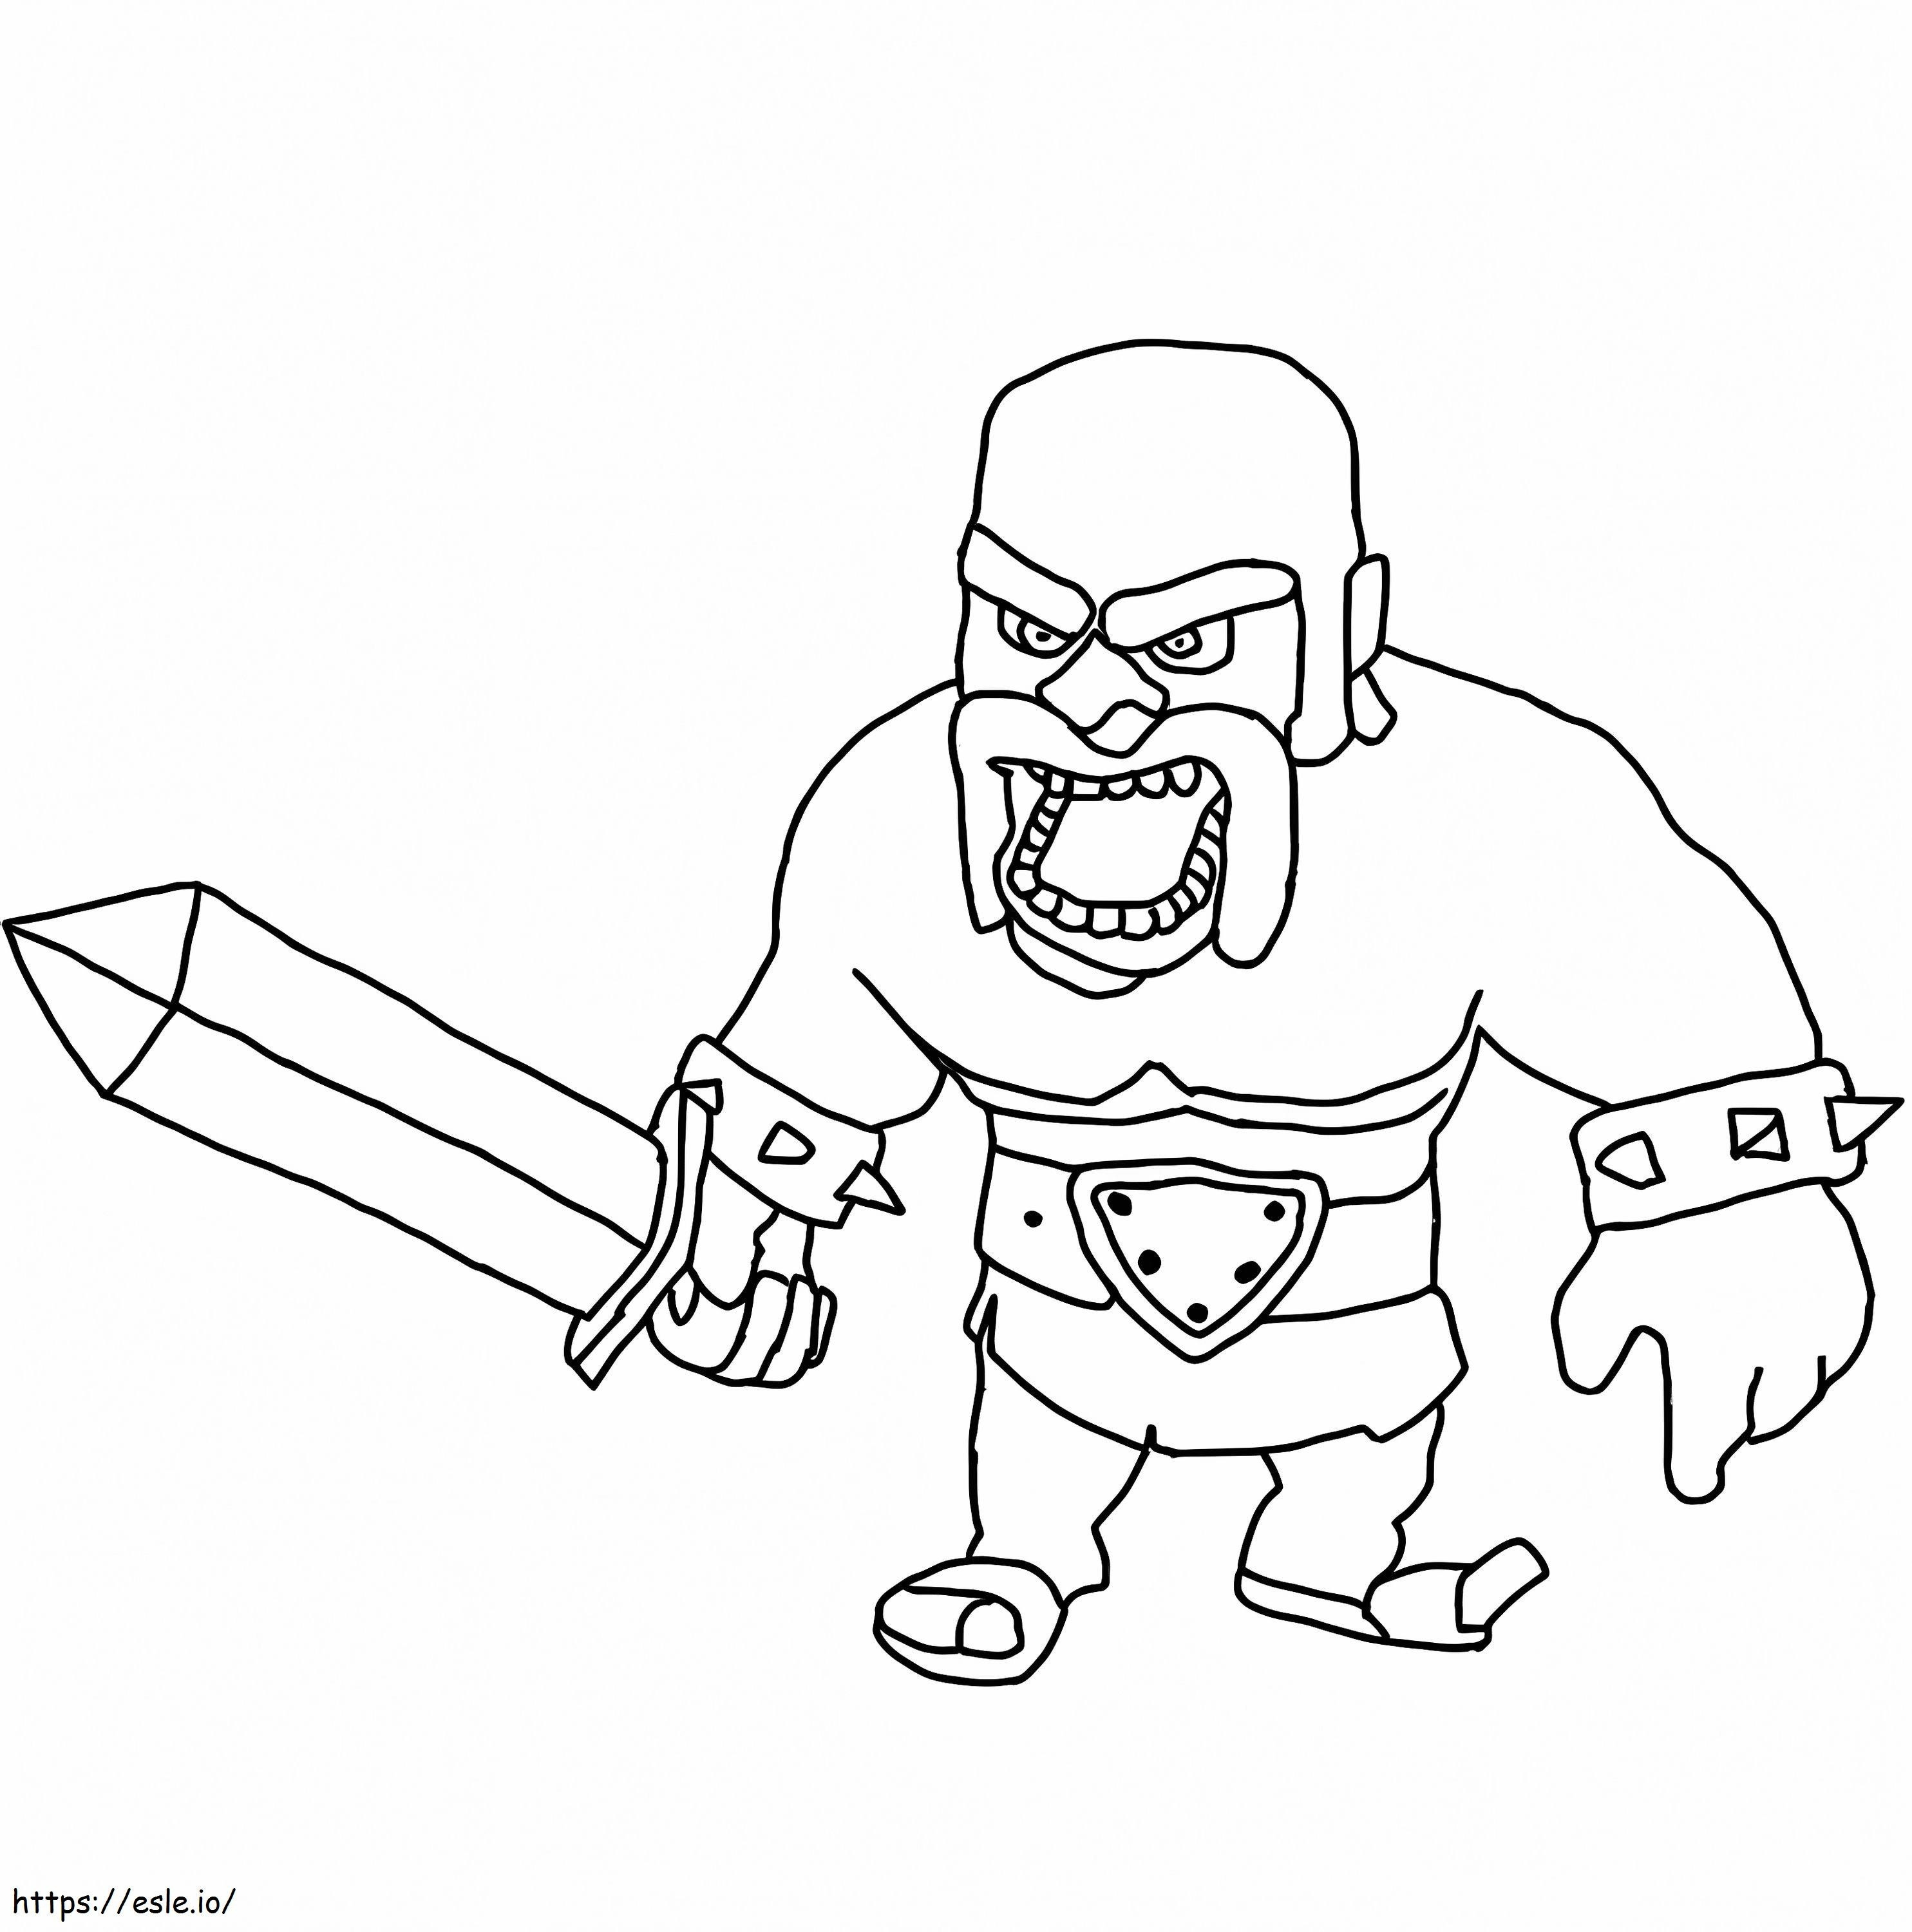 Barbarian Army coloring page